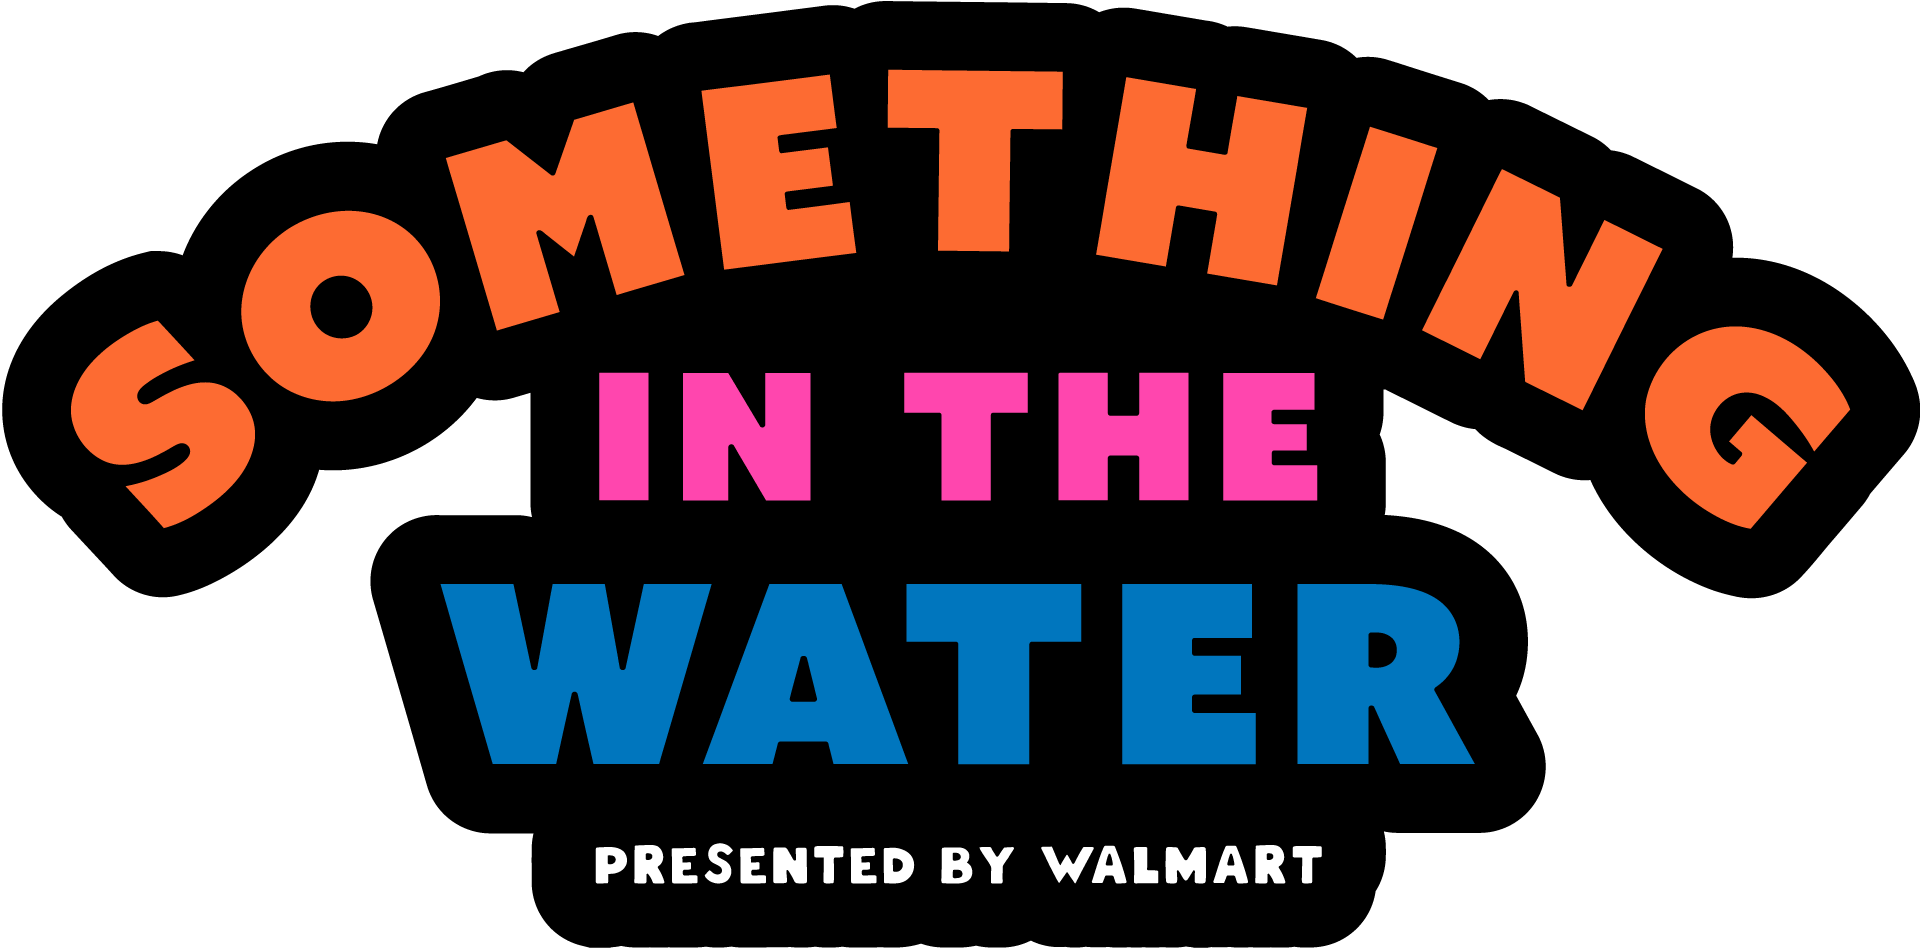 SOMETHING IN THE WATER - PRESENTED BY WALMART